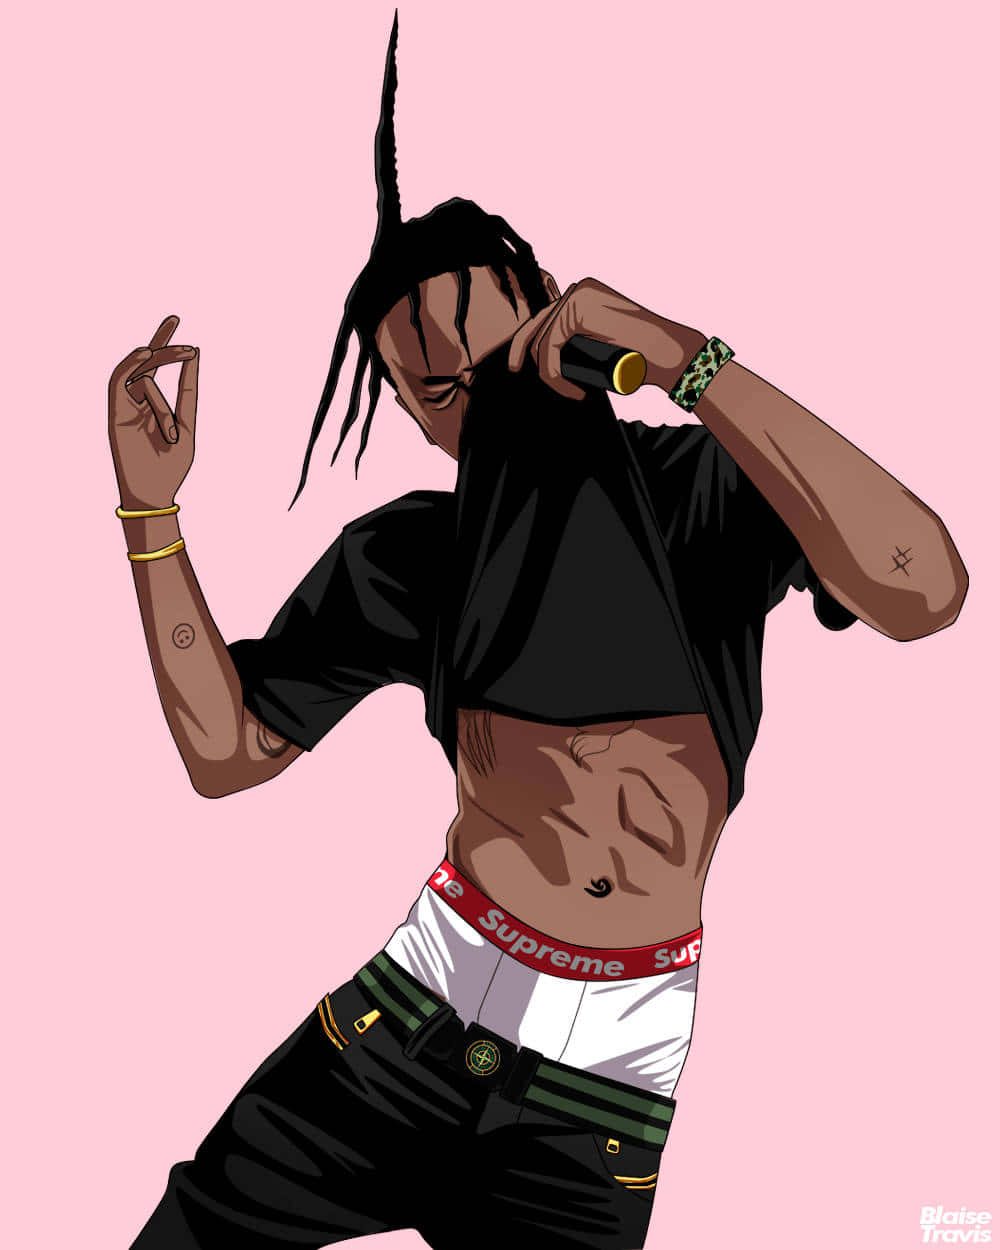 A Man With Dreadlocks Is Dancing On A Pink Background